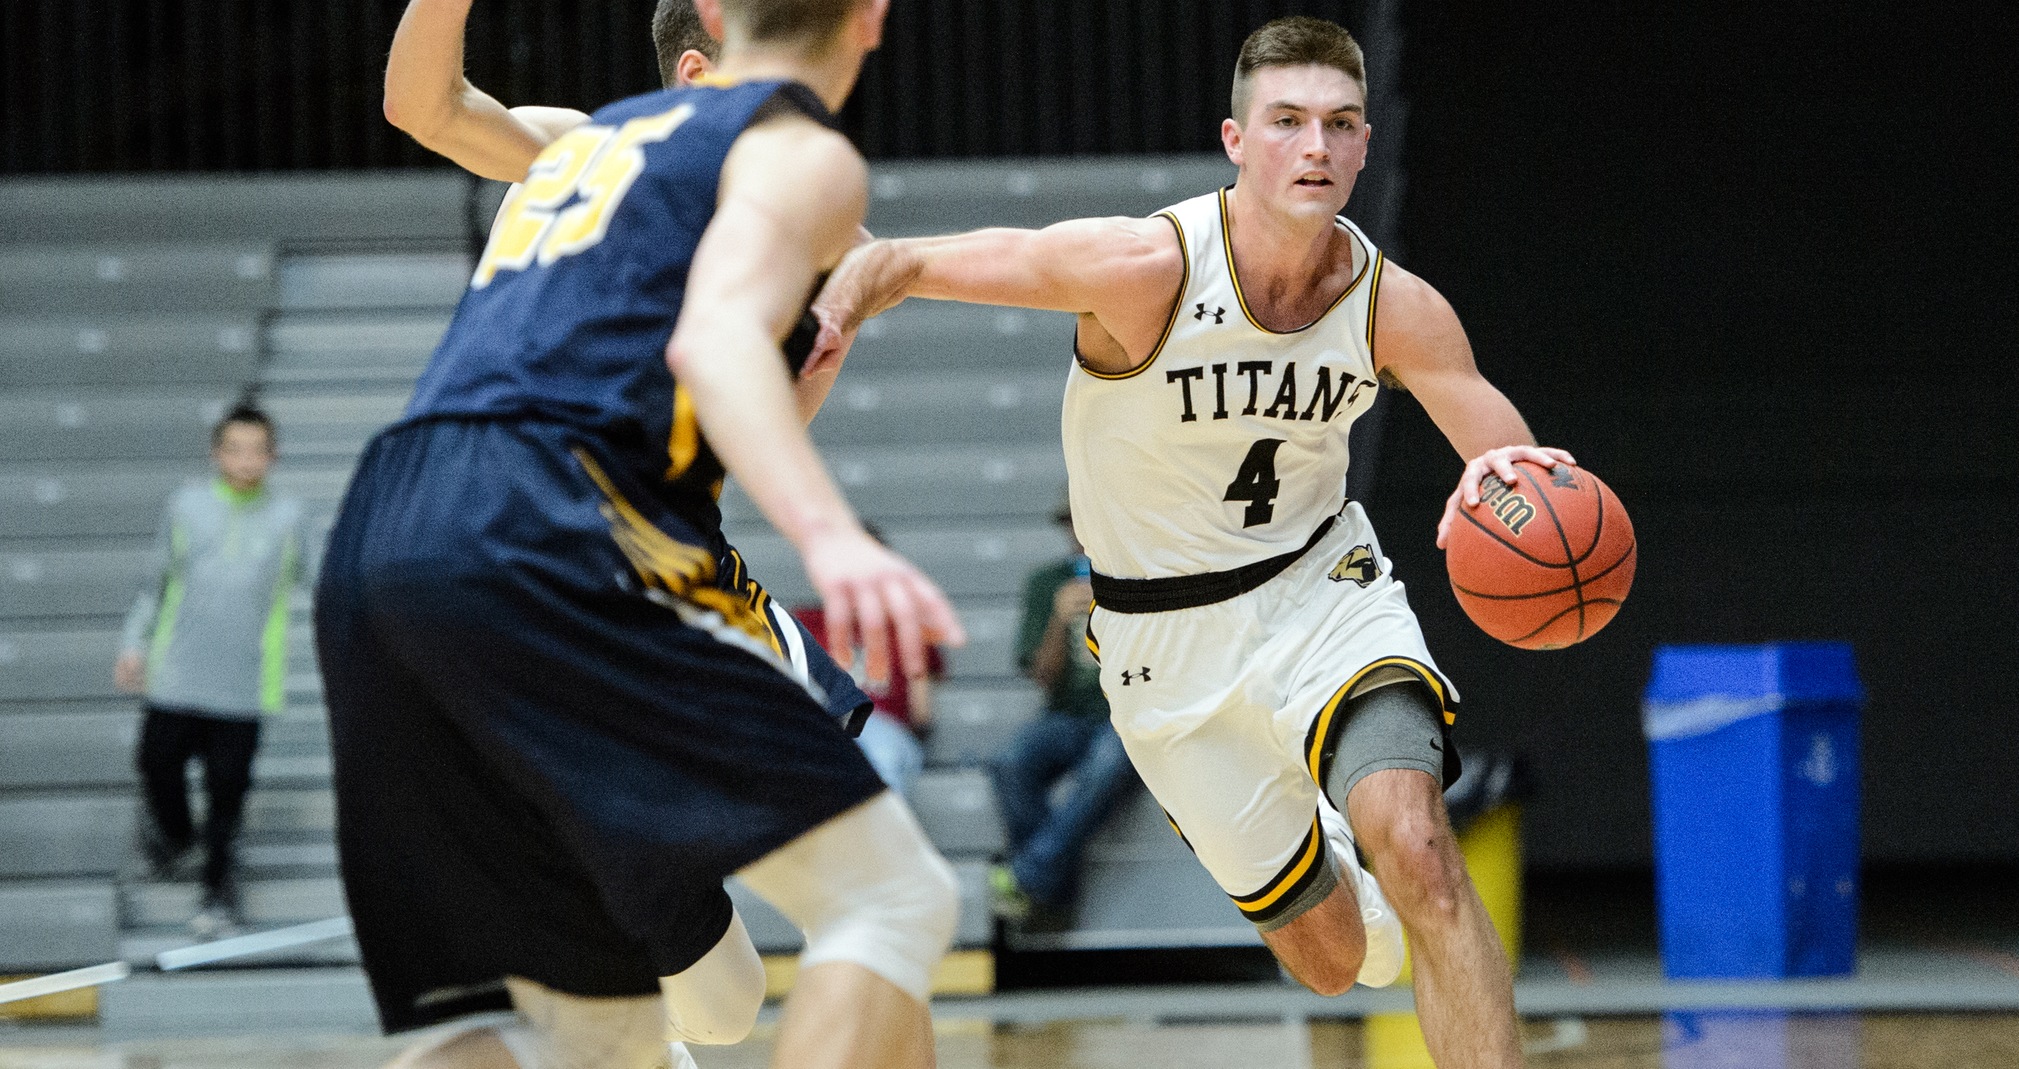 Brett Wittchow scored 19 points while counting five rebounds and three assists against the second-ranked Vikings.